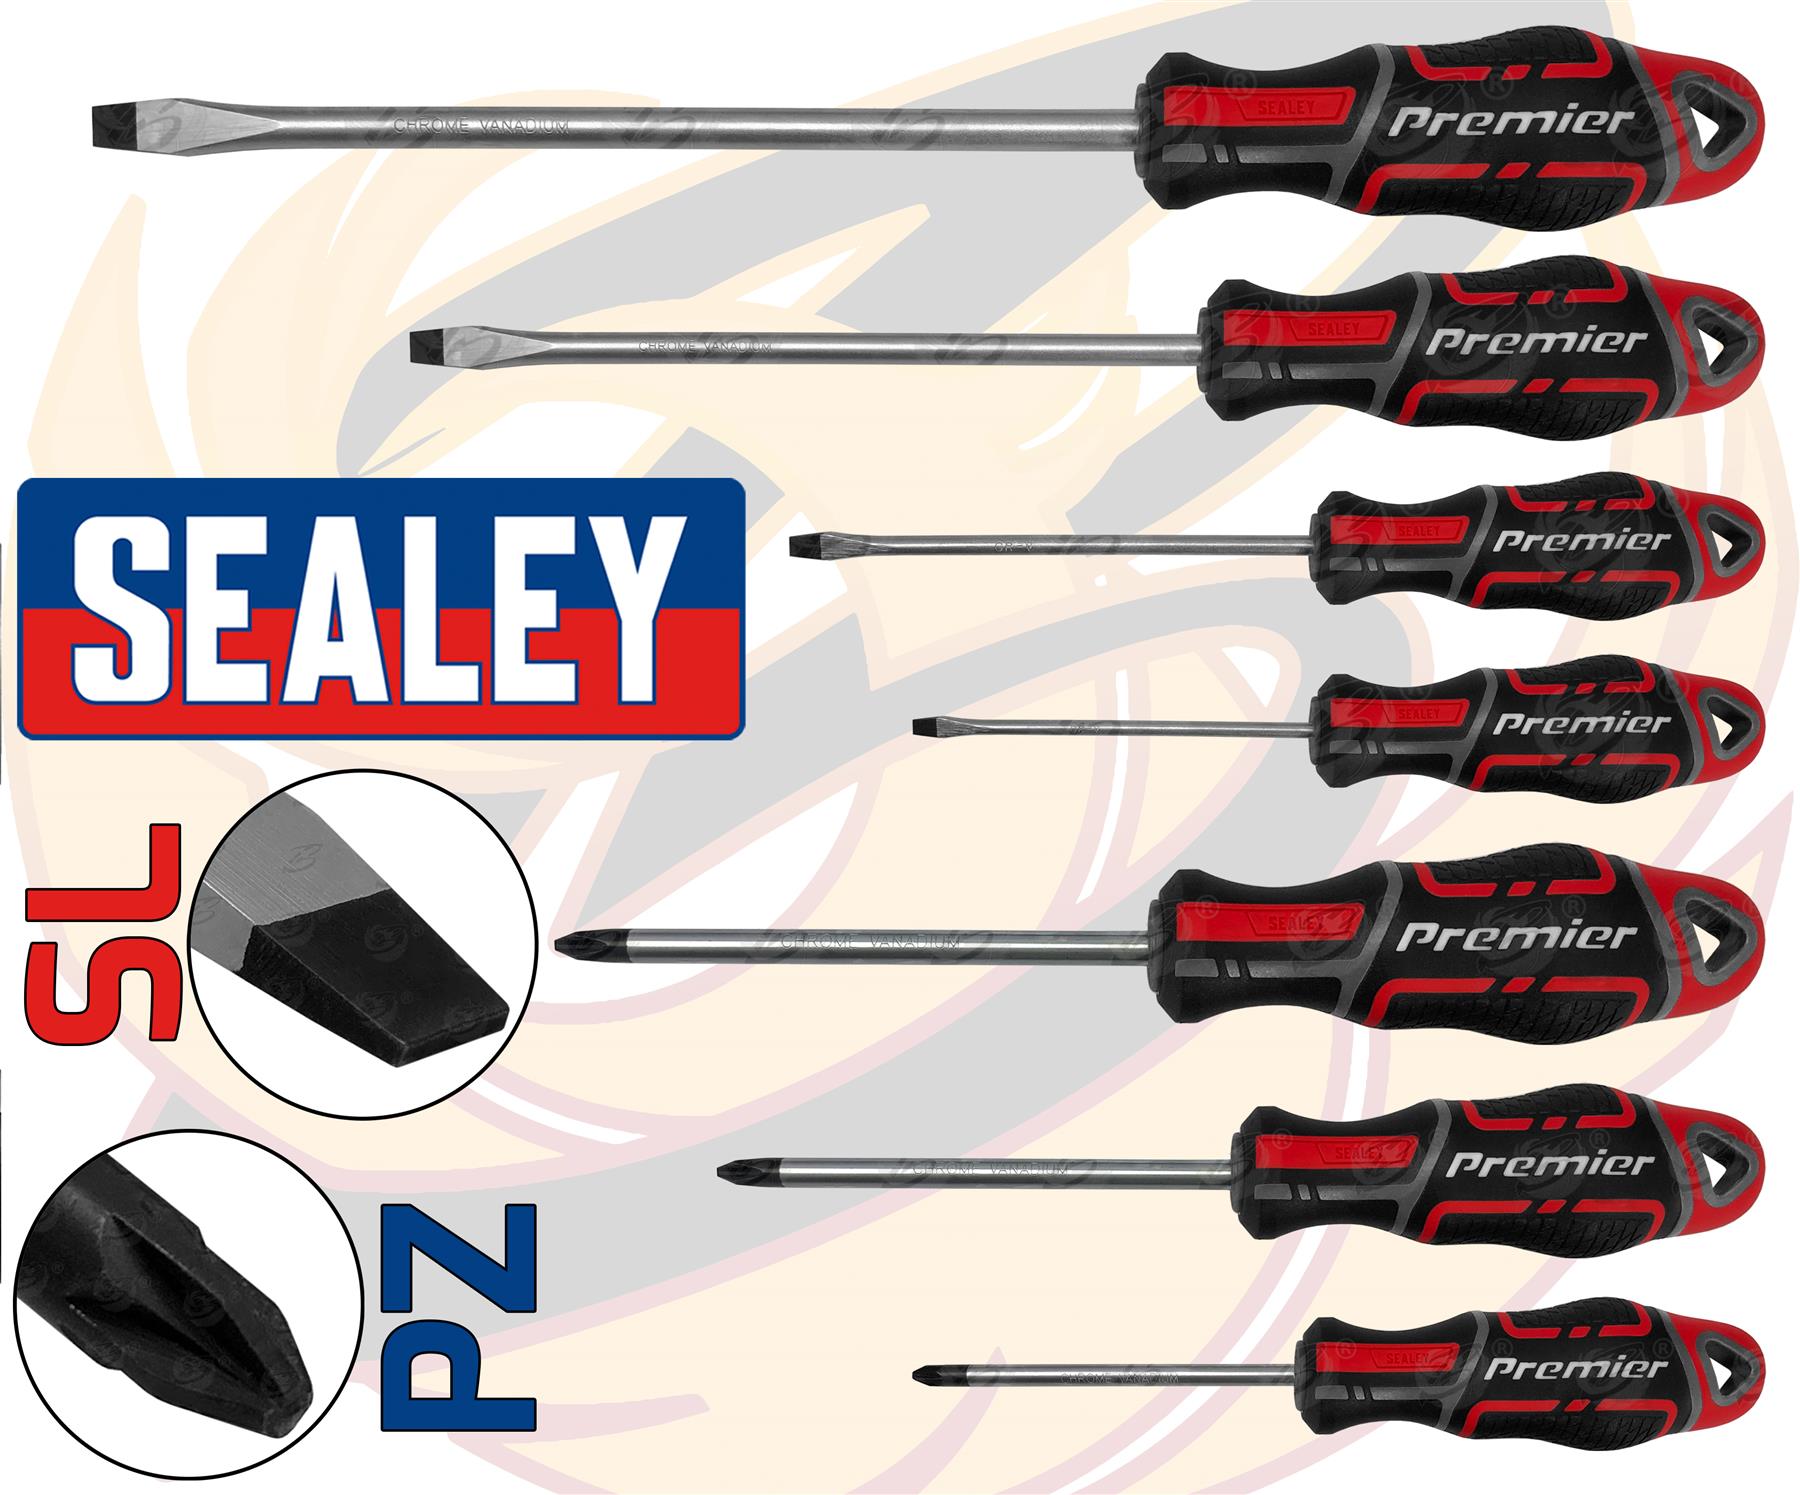 SEALEY 7PCS MAGNETIC SCREWDRIVERS ( SLOTTED - POZIDRIVE ) ( RED )